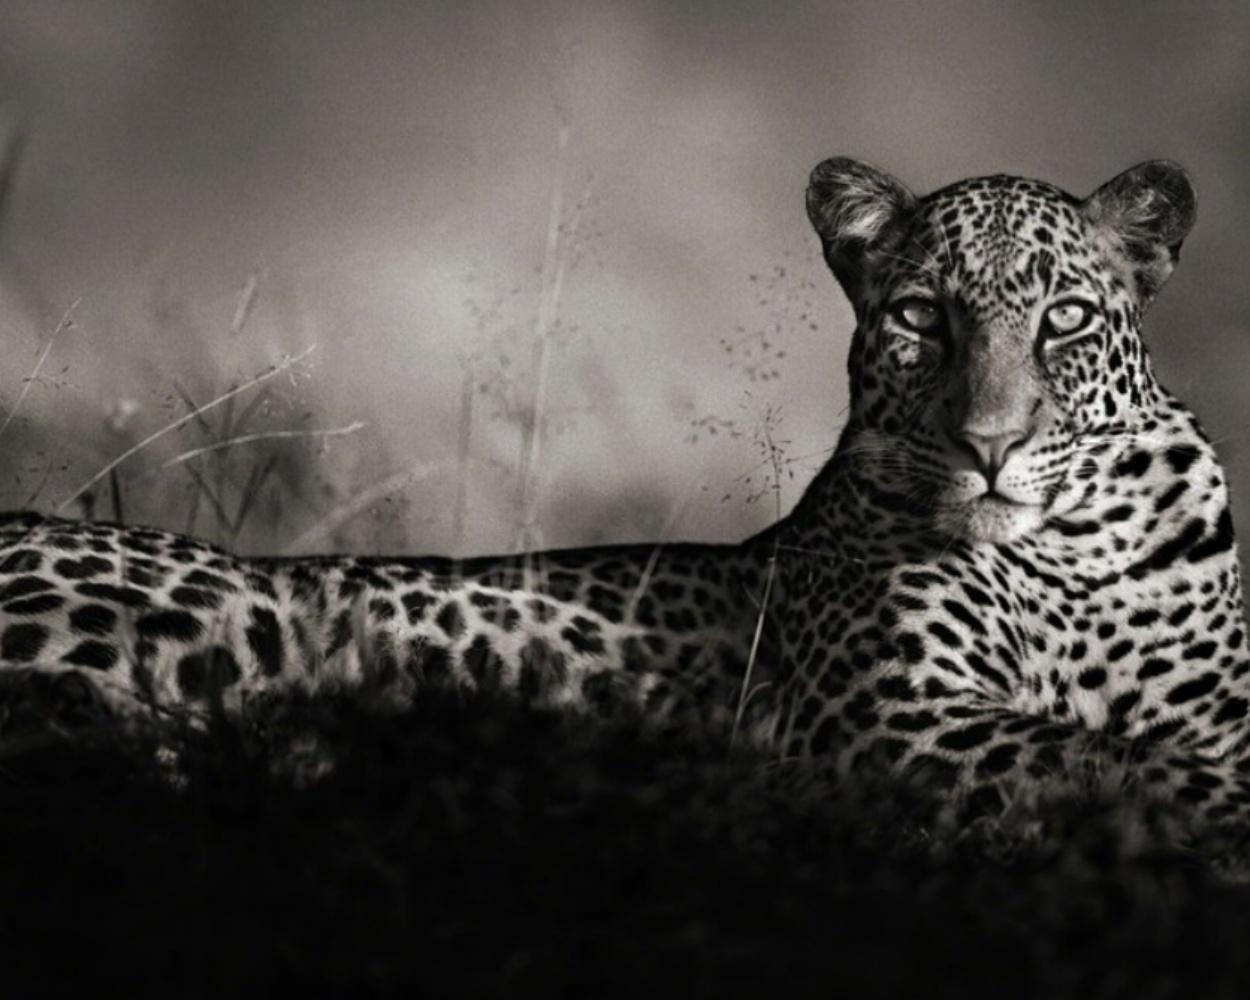 NICK BRANDT (*1966, England)
Leopard Staring, Masai Mara
2010
Platinum print
Sheet 171.12 x 88.9 cm (28 x 35 in.)
Frame 98 x 115 cm (38 5/8 x 45 1/4 in.)
Edition of 15; Ed. 3/15
Framed

Nick Brandt is a contemporary English photographer. His work